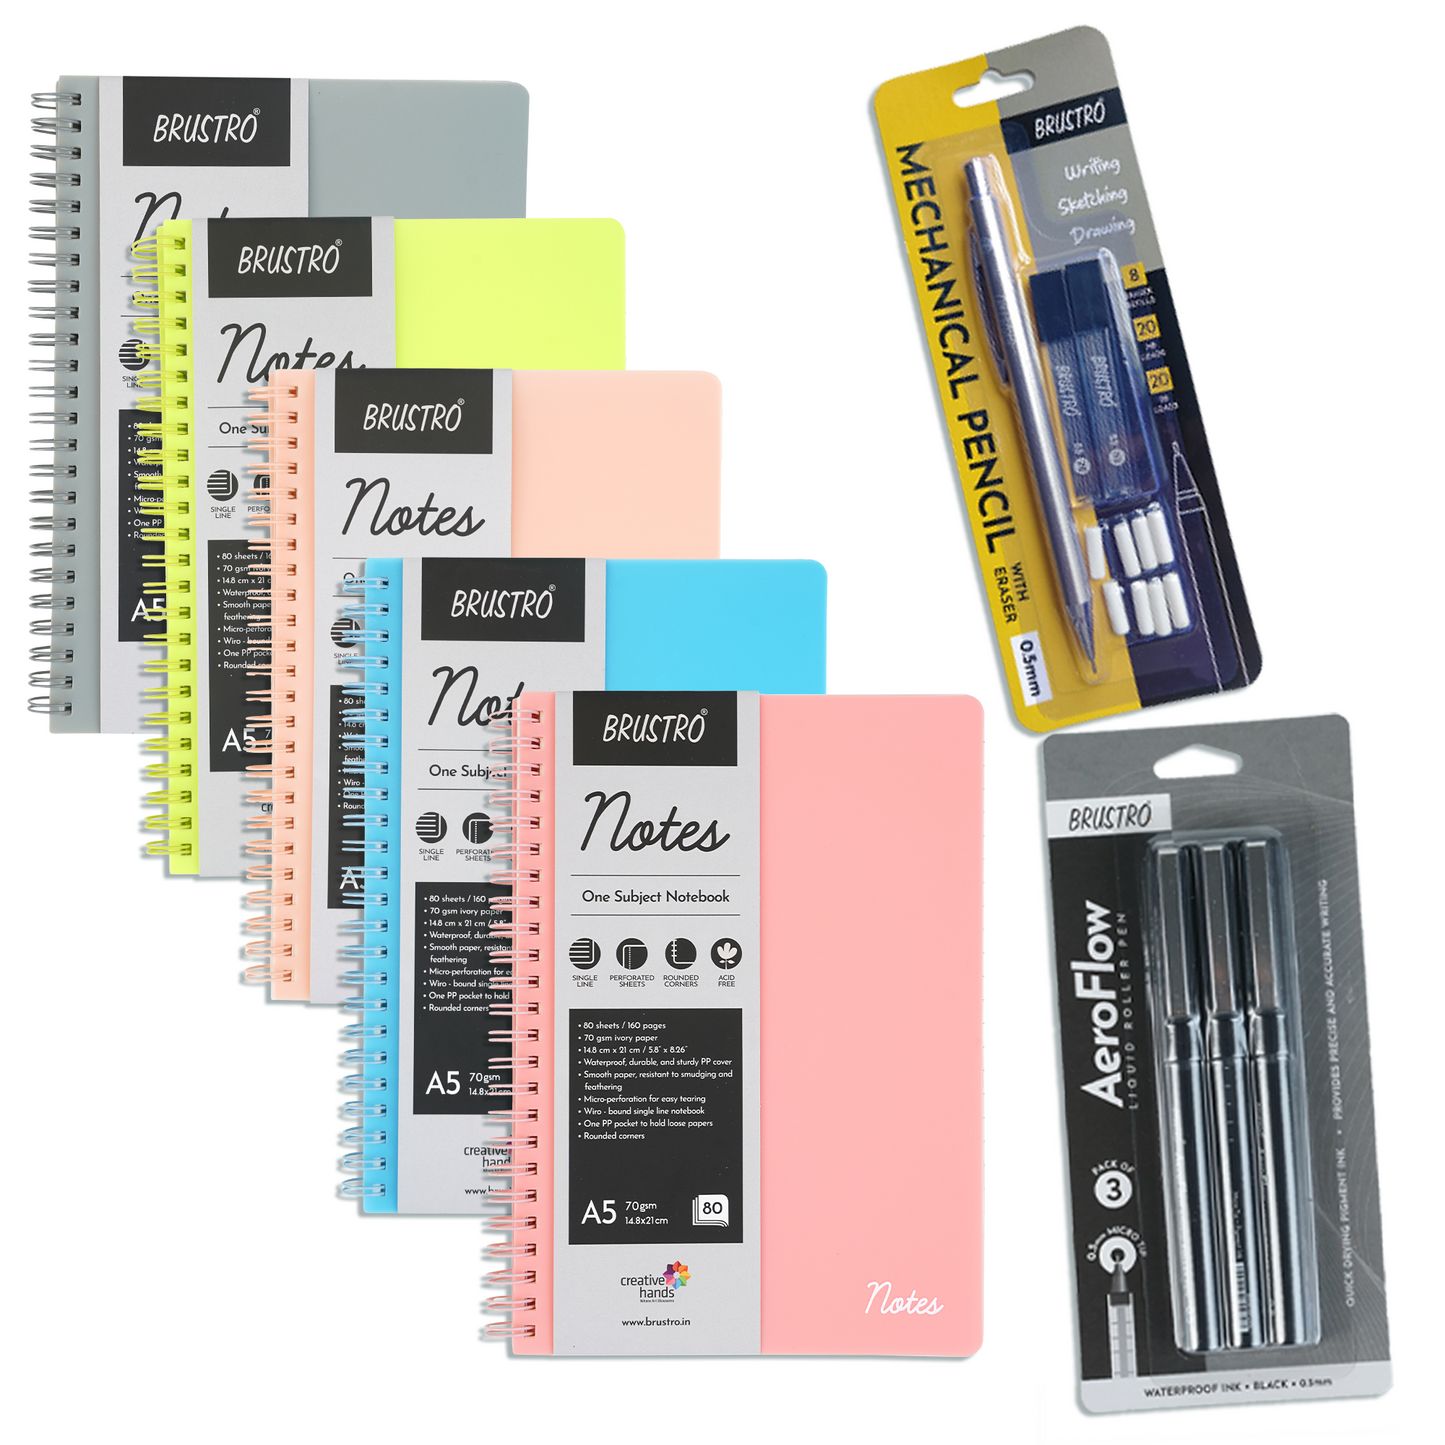 BRUSTRO Notes A5 Size,1 Subject Ruled Notebooks (Set of 5) with Free BRUSTRO Mechanical Pencil 0.5mm and AeroFlow Liquid Ink Rollerball Pens 0.5 Micro Tip (Worth Rs. 348)